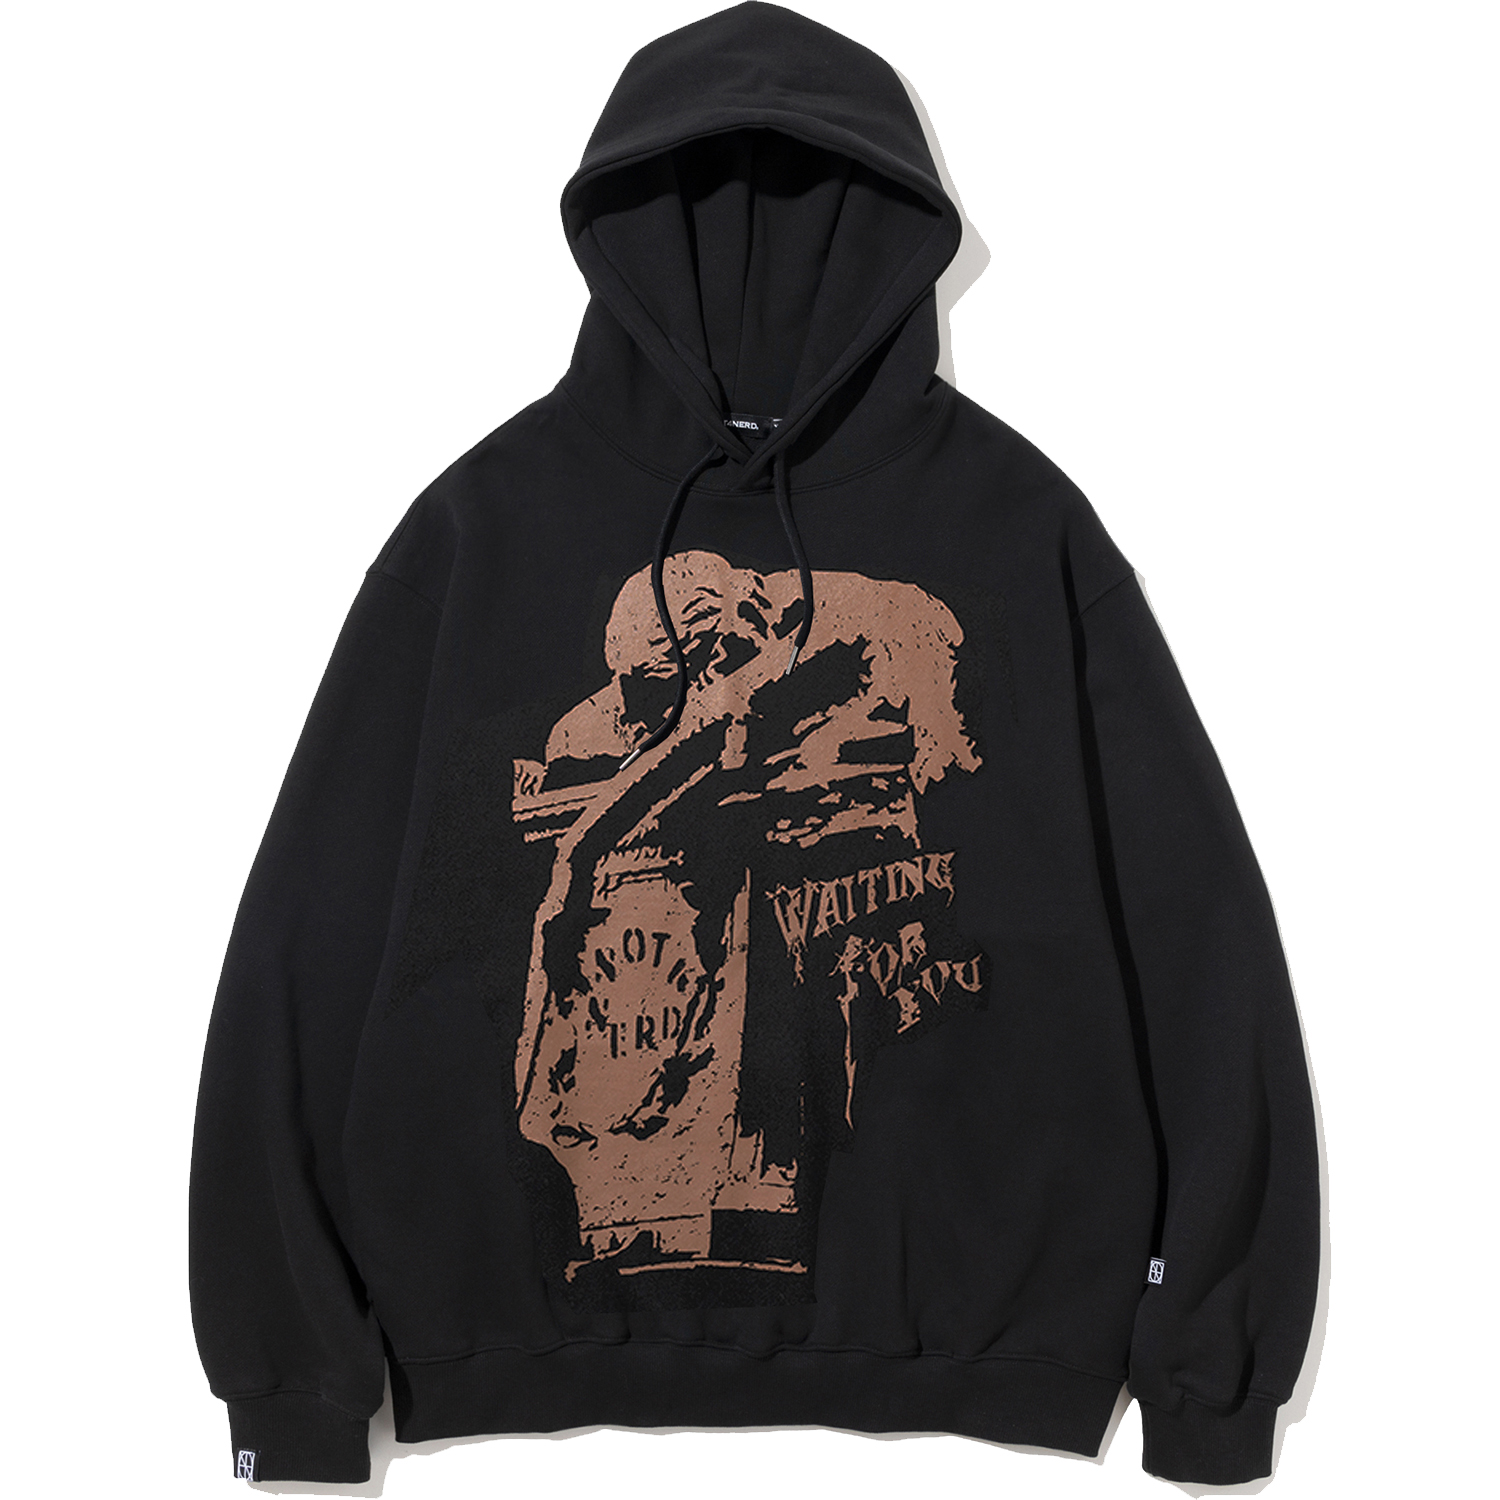 Waiting For You Pullover Hood - Black,NOT4NERD